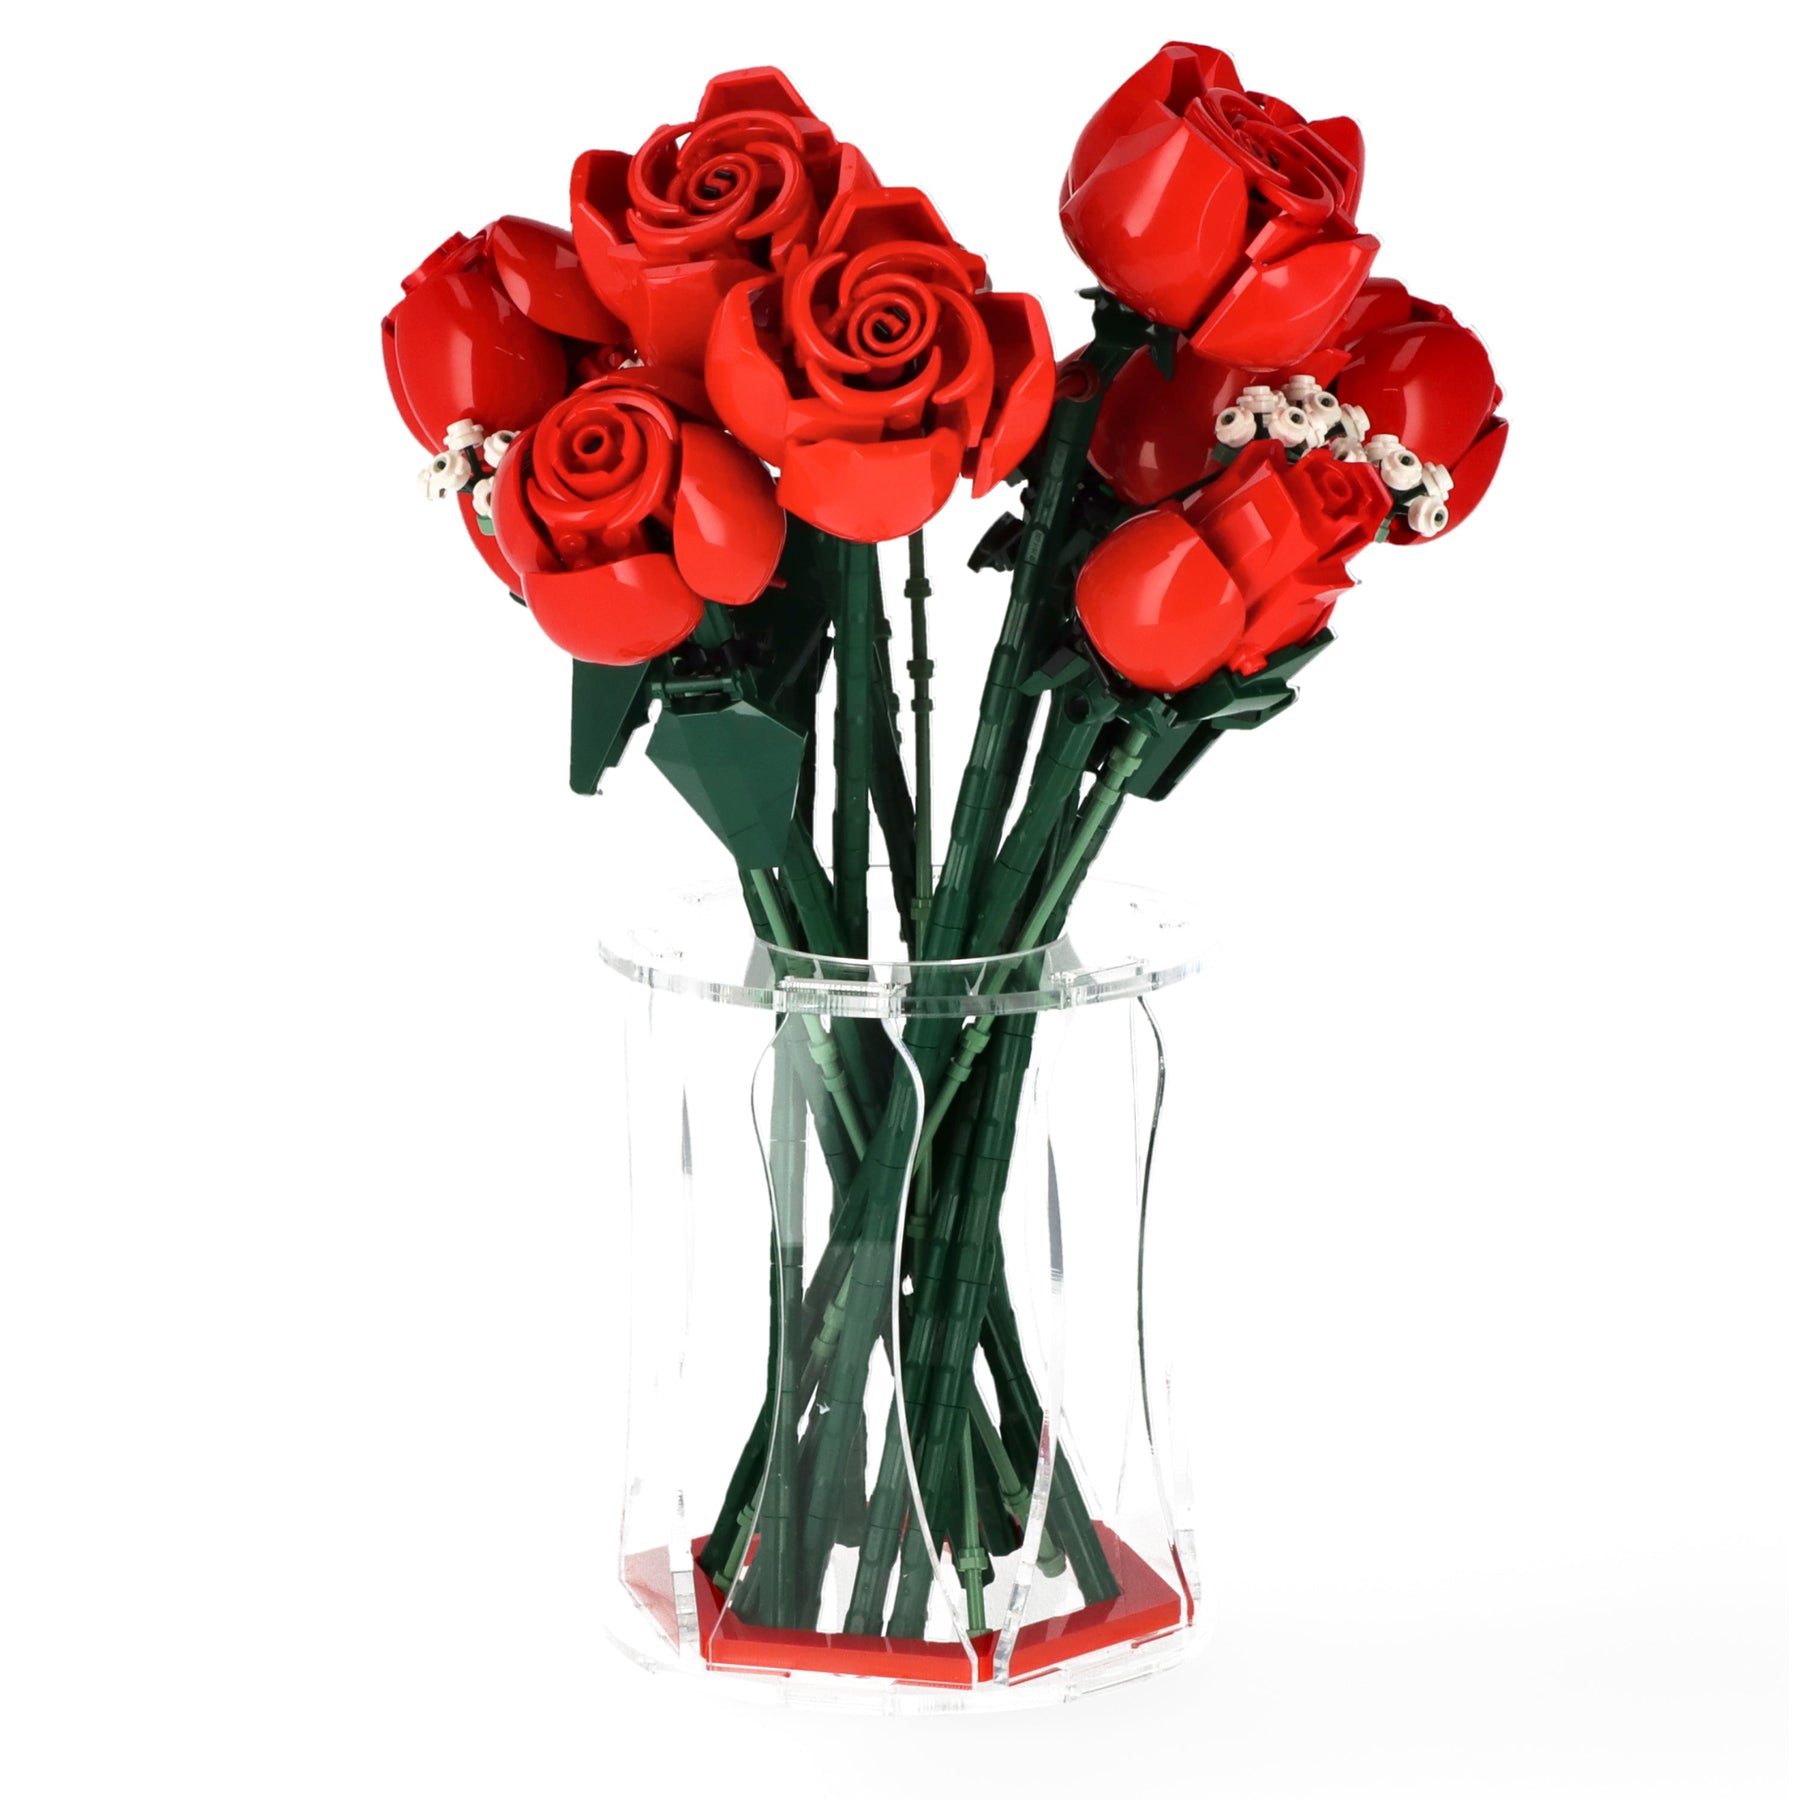 Display Vase For LEGO 10328 Bouquet of Roses